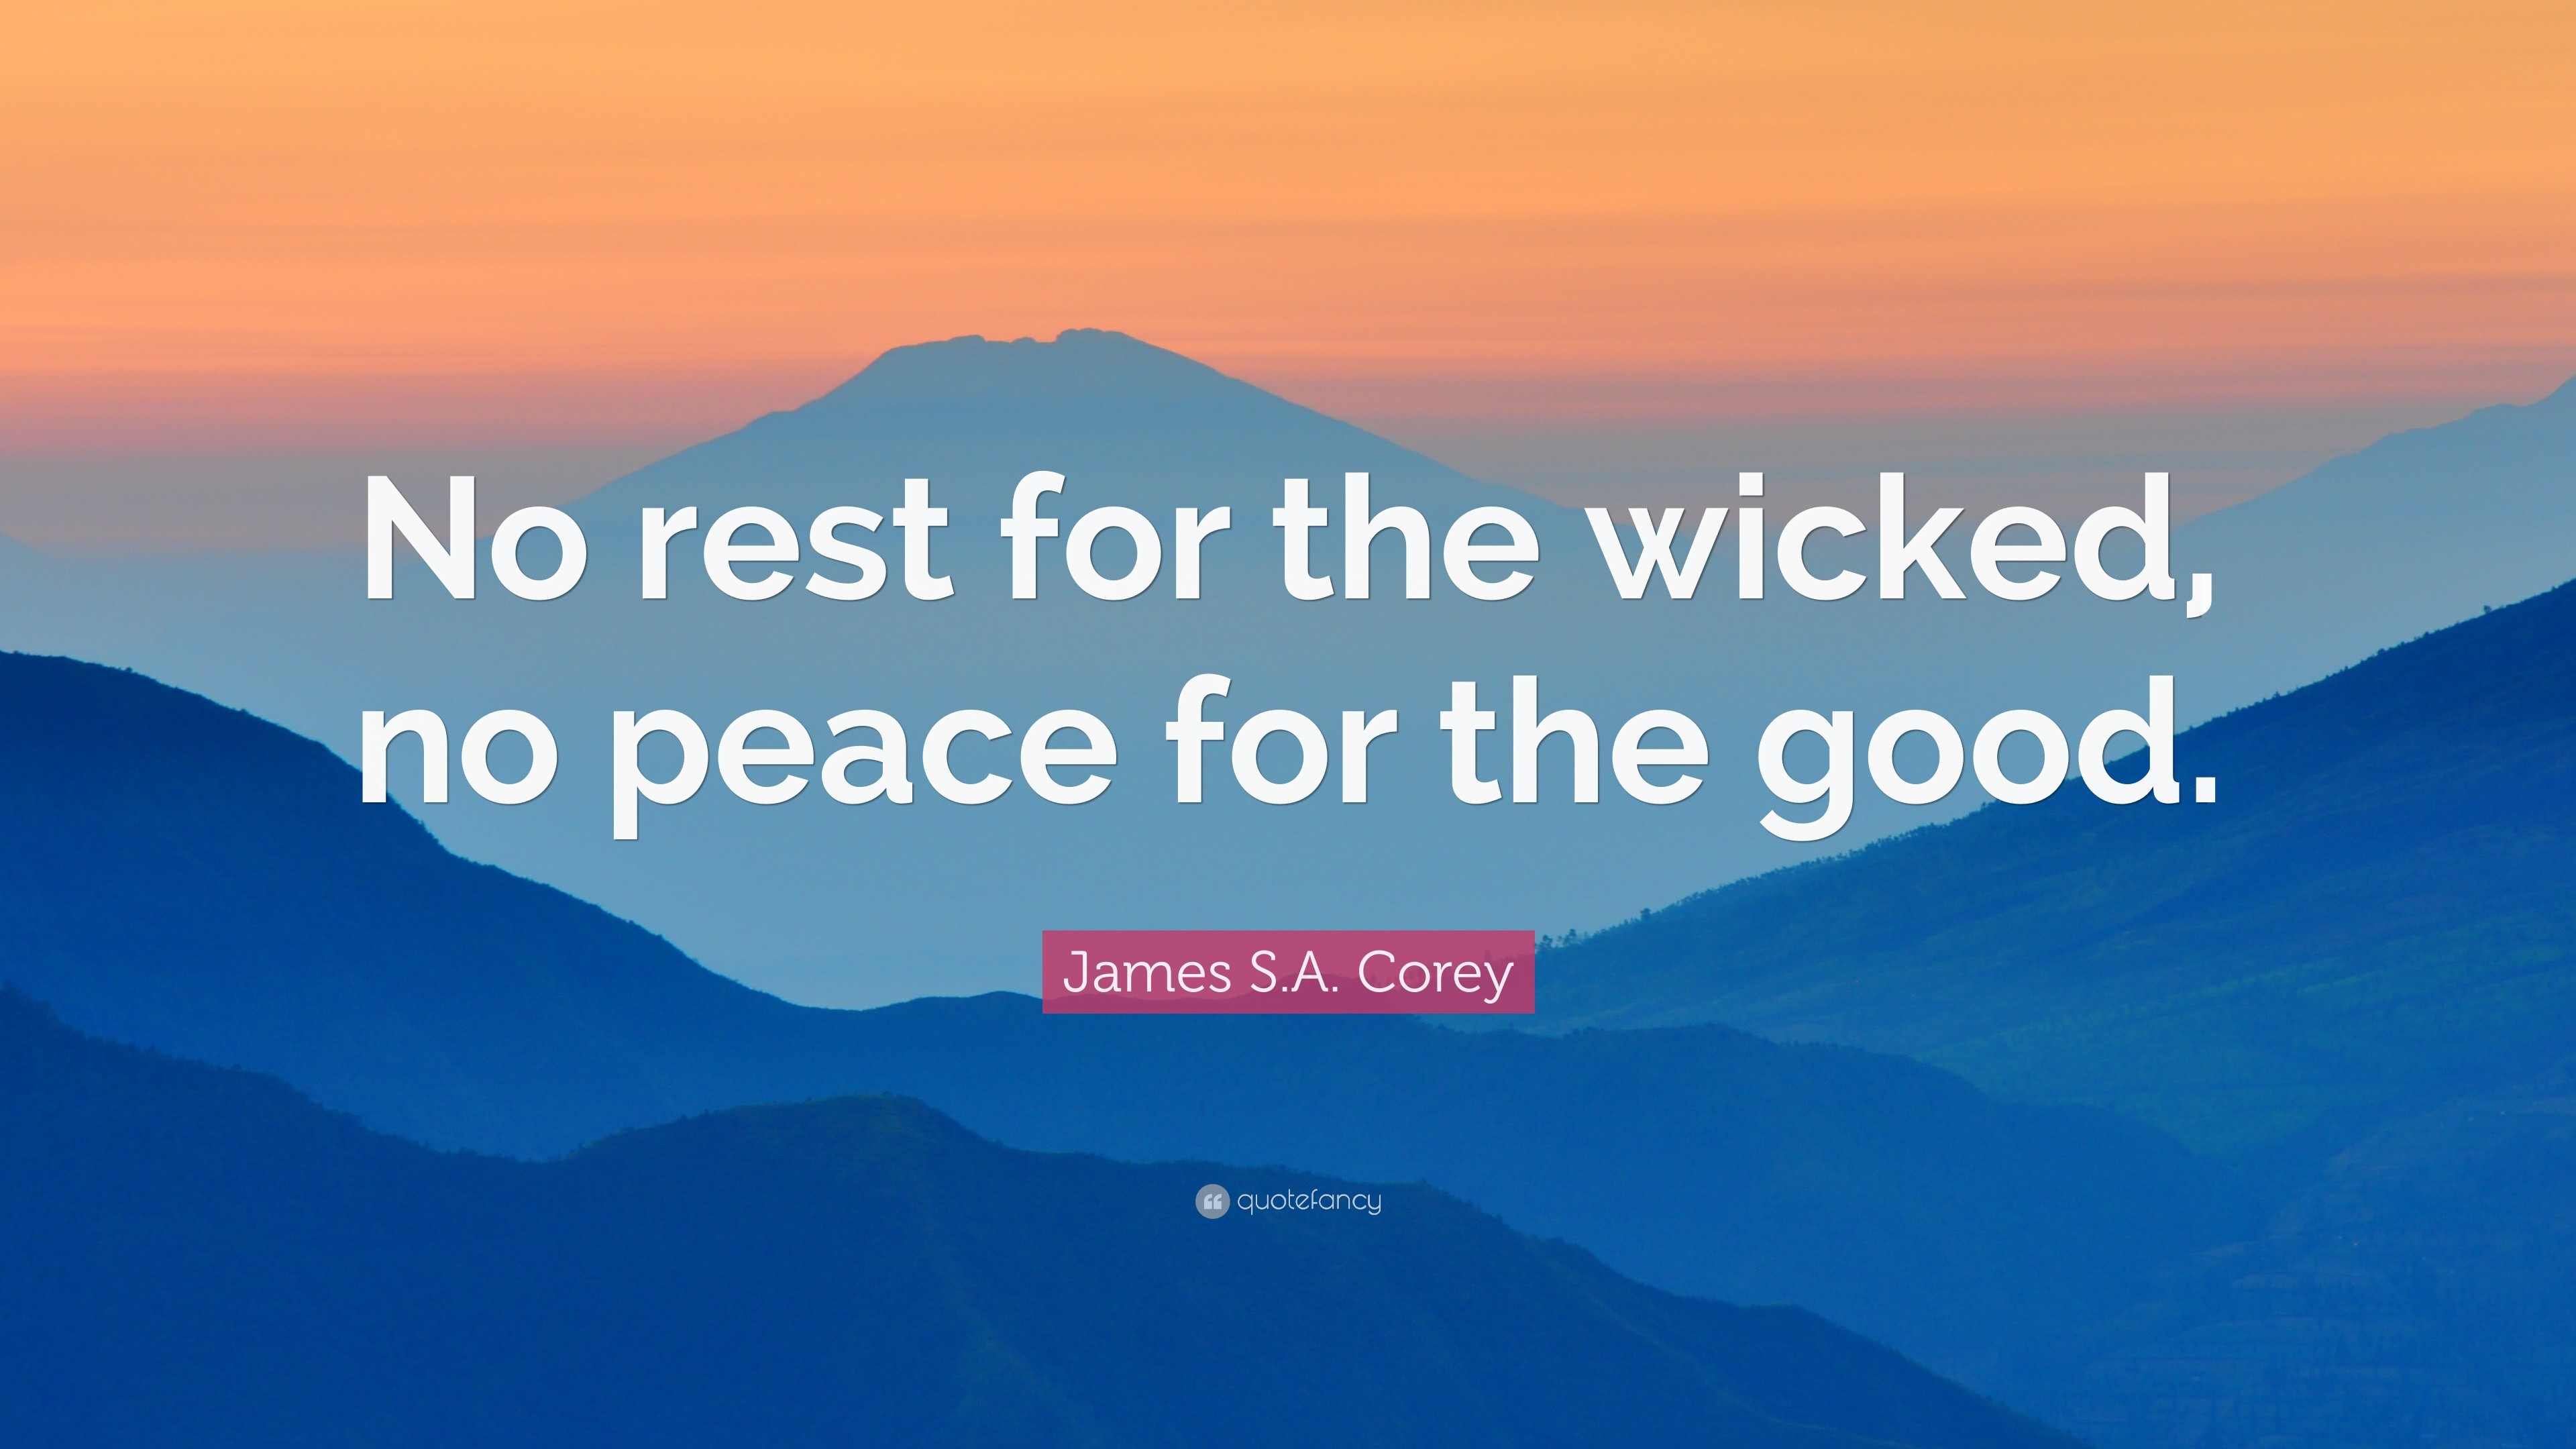 3840x2160 James S.A. Corey Quote: “No rest for the wicked, no peace for the